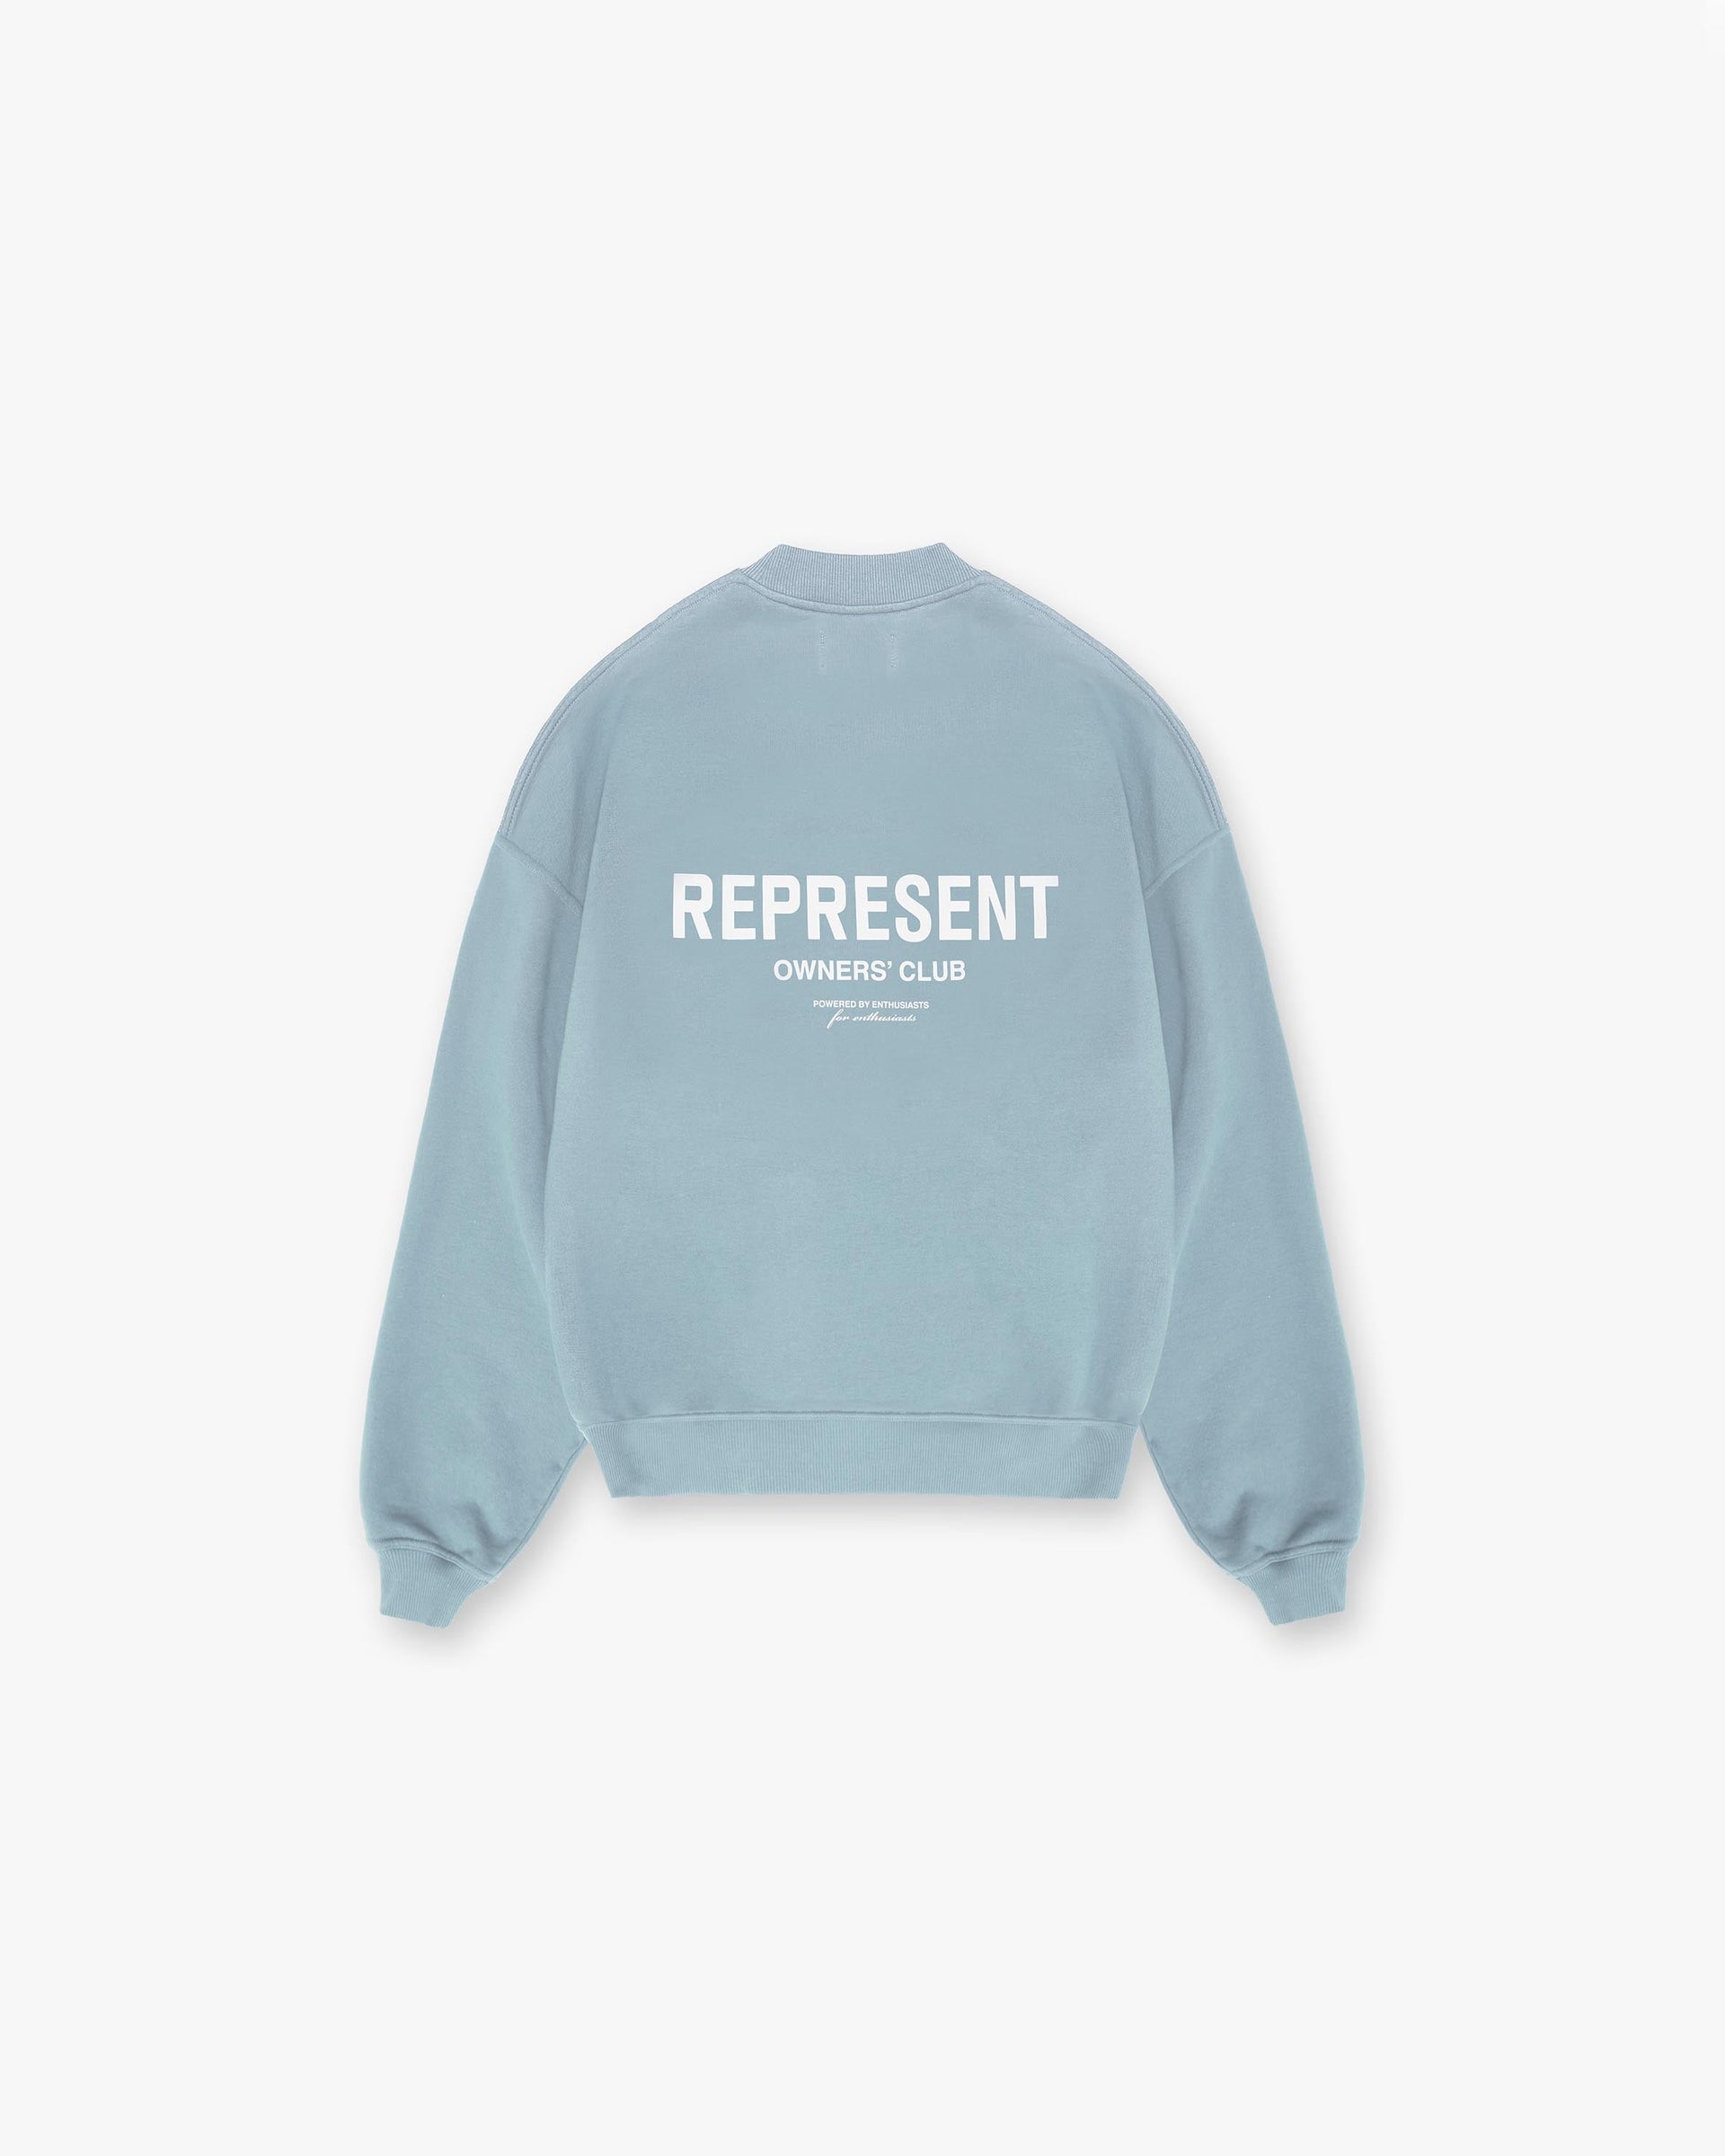 Represent Owners Club Sweater | Powder Blue Sweaters Owners Club | Represent Clo